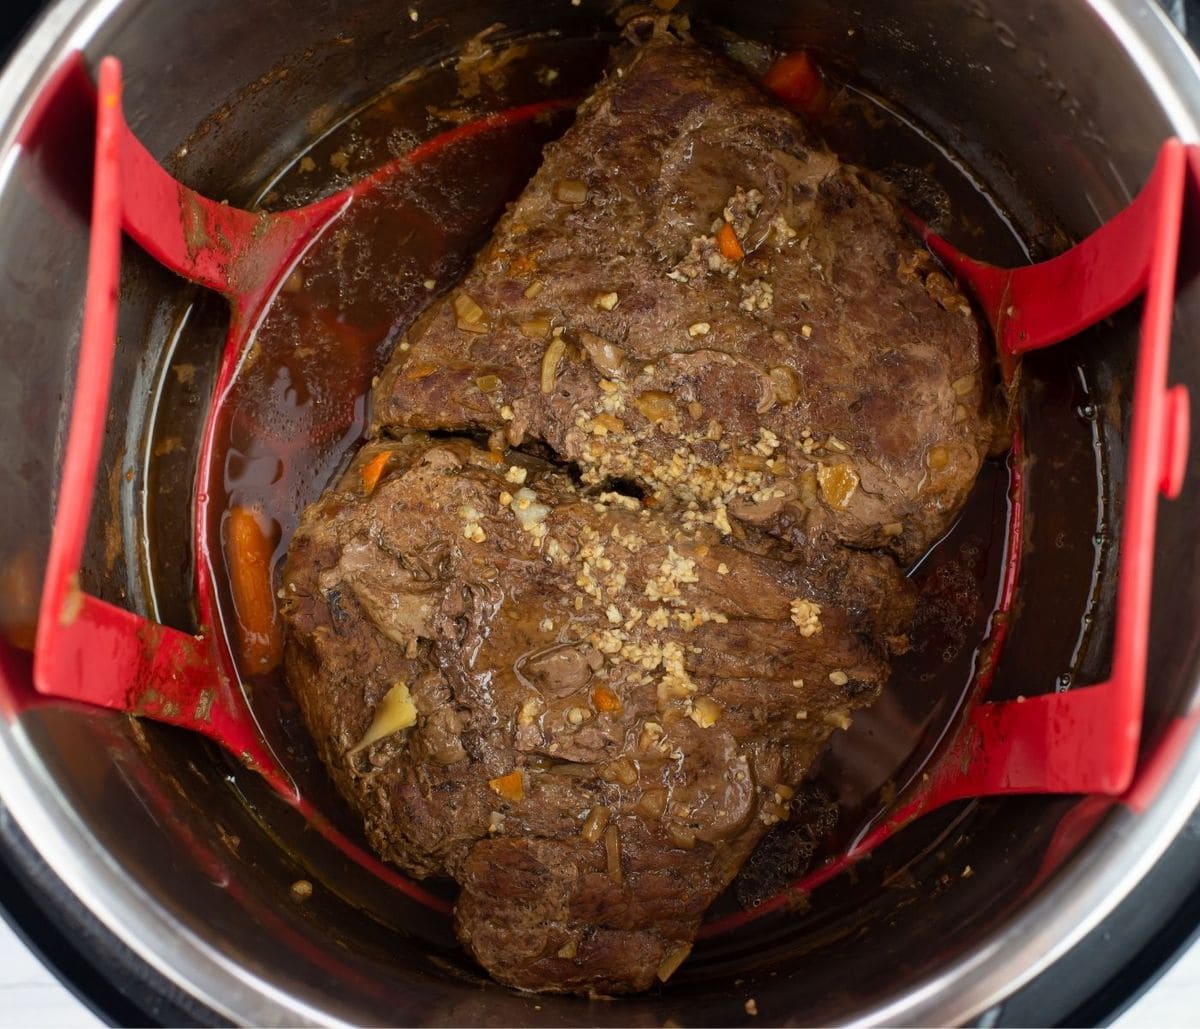 How Long To Cook London Broil In An Electric Pressure Cooker